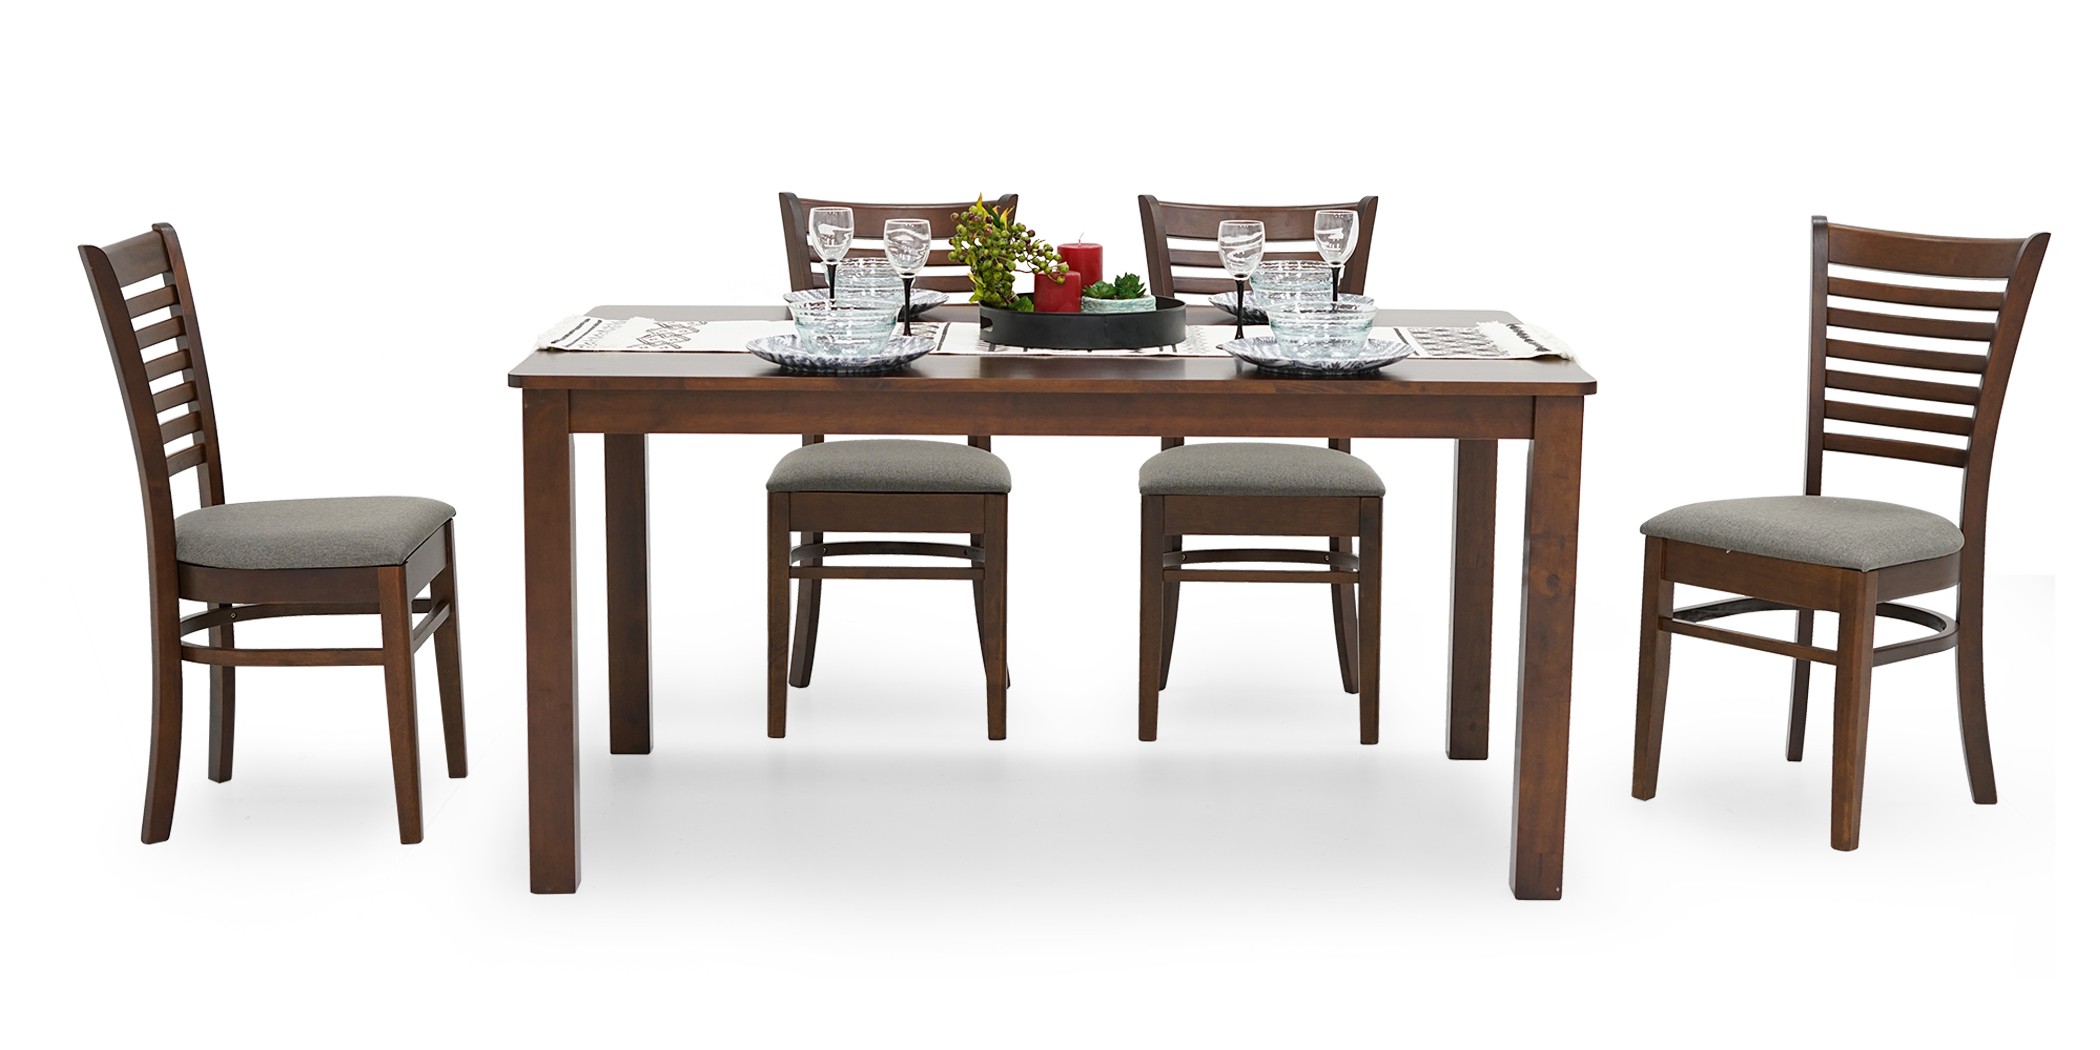 Leuven Dining Table and 6 Chairs Wenge Color